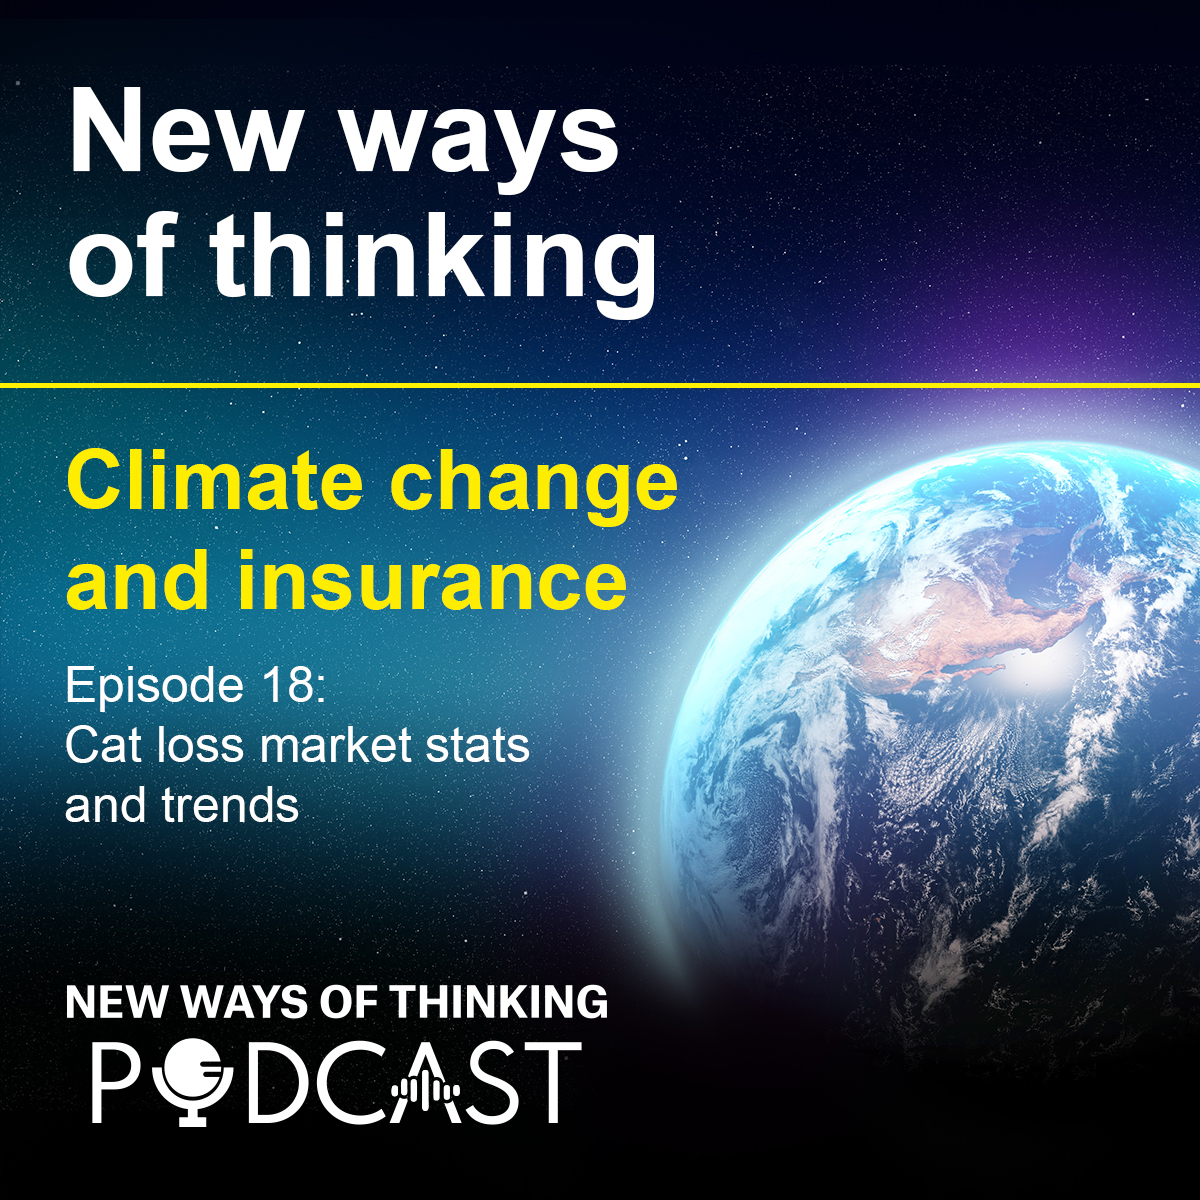 Climate change is causing more severe catastrophes and driving up loss costs. But there are some bright spots. Listen to @rauch_ernst of .@MunichRe & @OShaughnessyJef discuss #climatechange trends in the new episode of HSB’s #NewWaysofThinking Podcast: hsb-podcast.libsyn.com/climate-change…